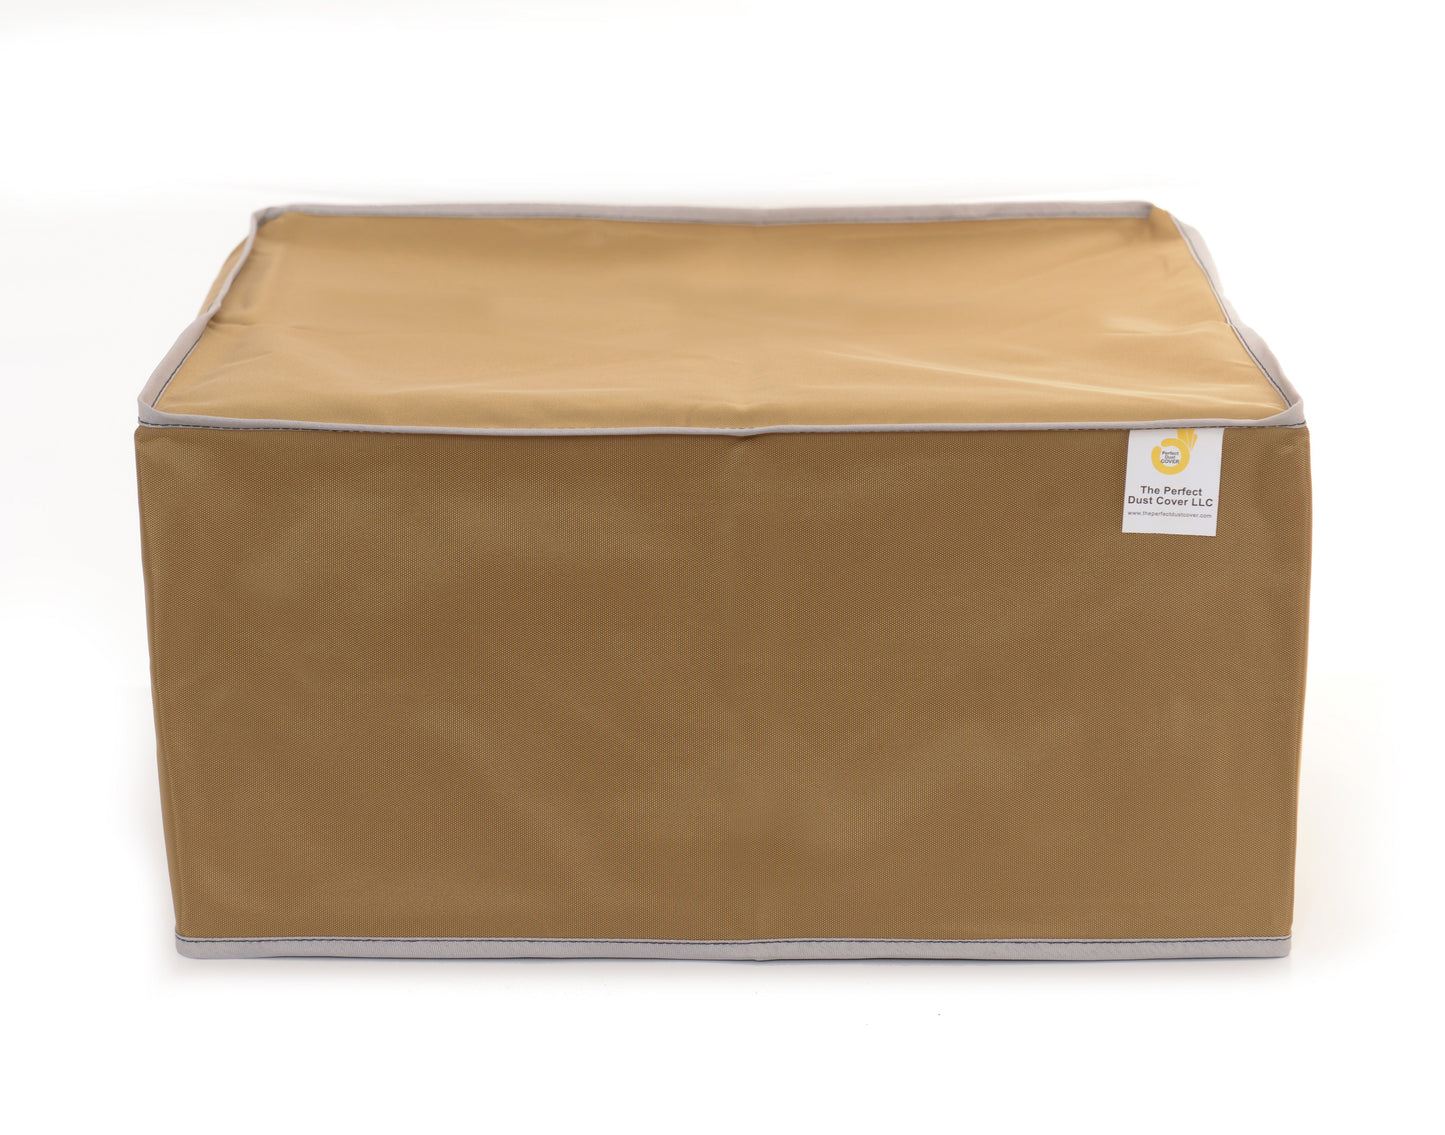 The Perfect Dust Cover, Tan Nylon Cover Compatible with Konica Minolta Bizhub 4050 Copier Printer Scanner, Anti Static and Waterproof Dimensions 19.5''W x 18.5''D x 22''H by The Perfect Dust Cover